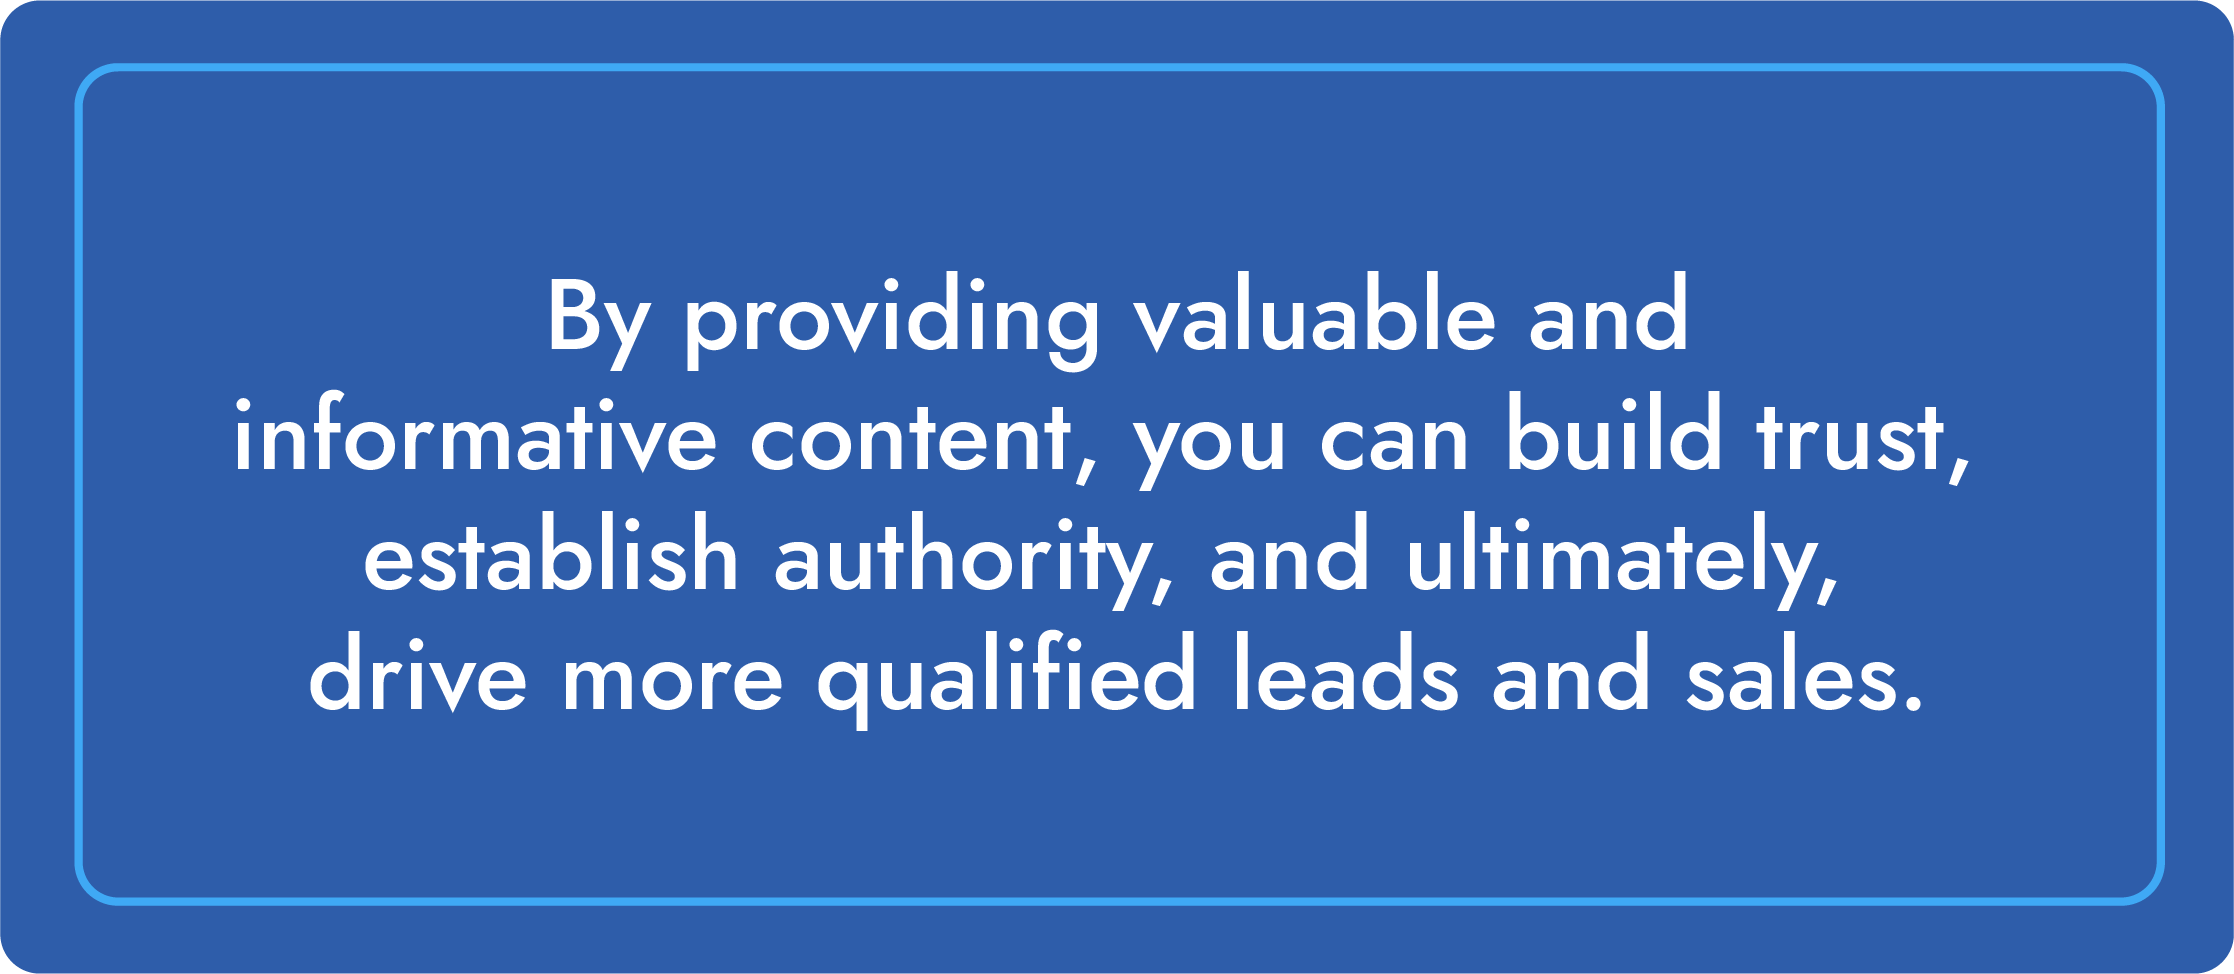 By providing valuable and informative content, you can build trust, establish authority, and ultimately, drive more qualified leads and sales.